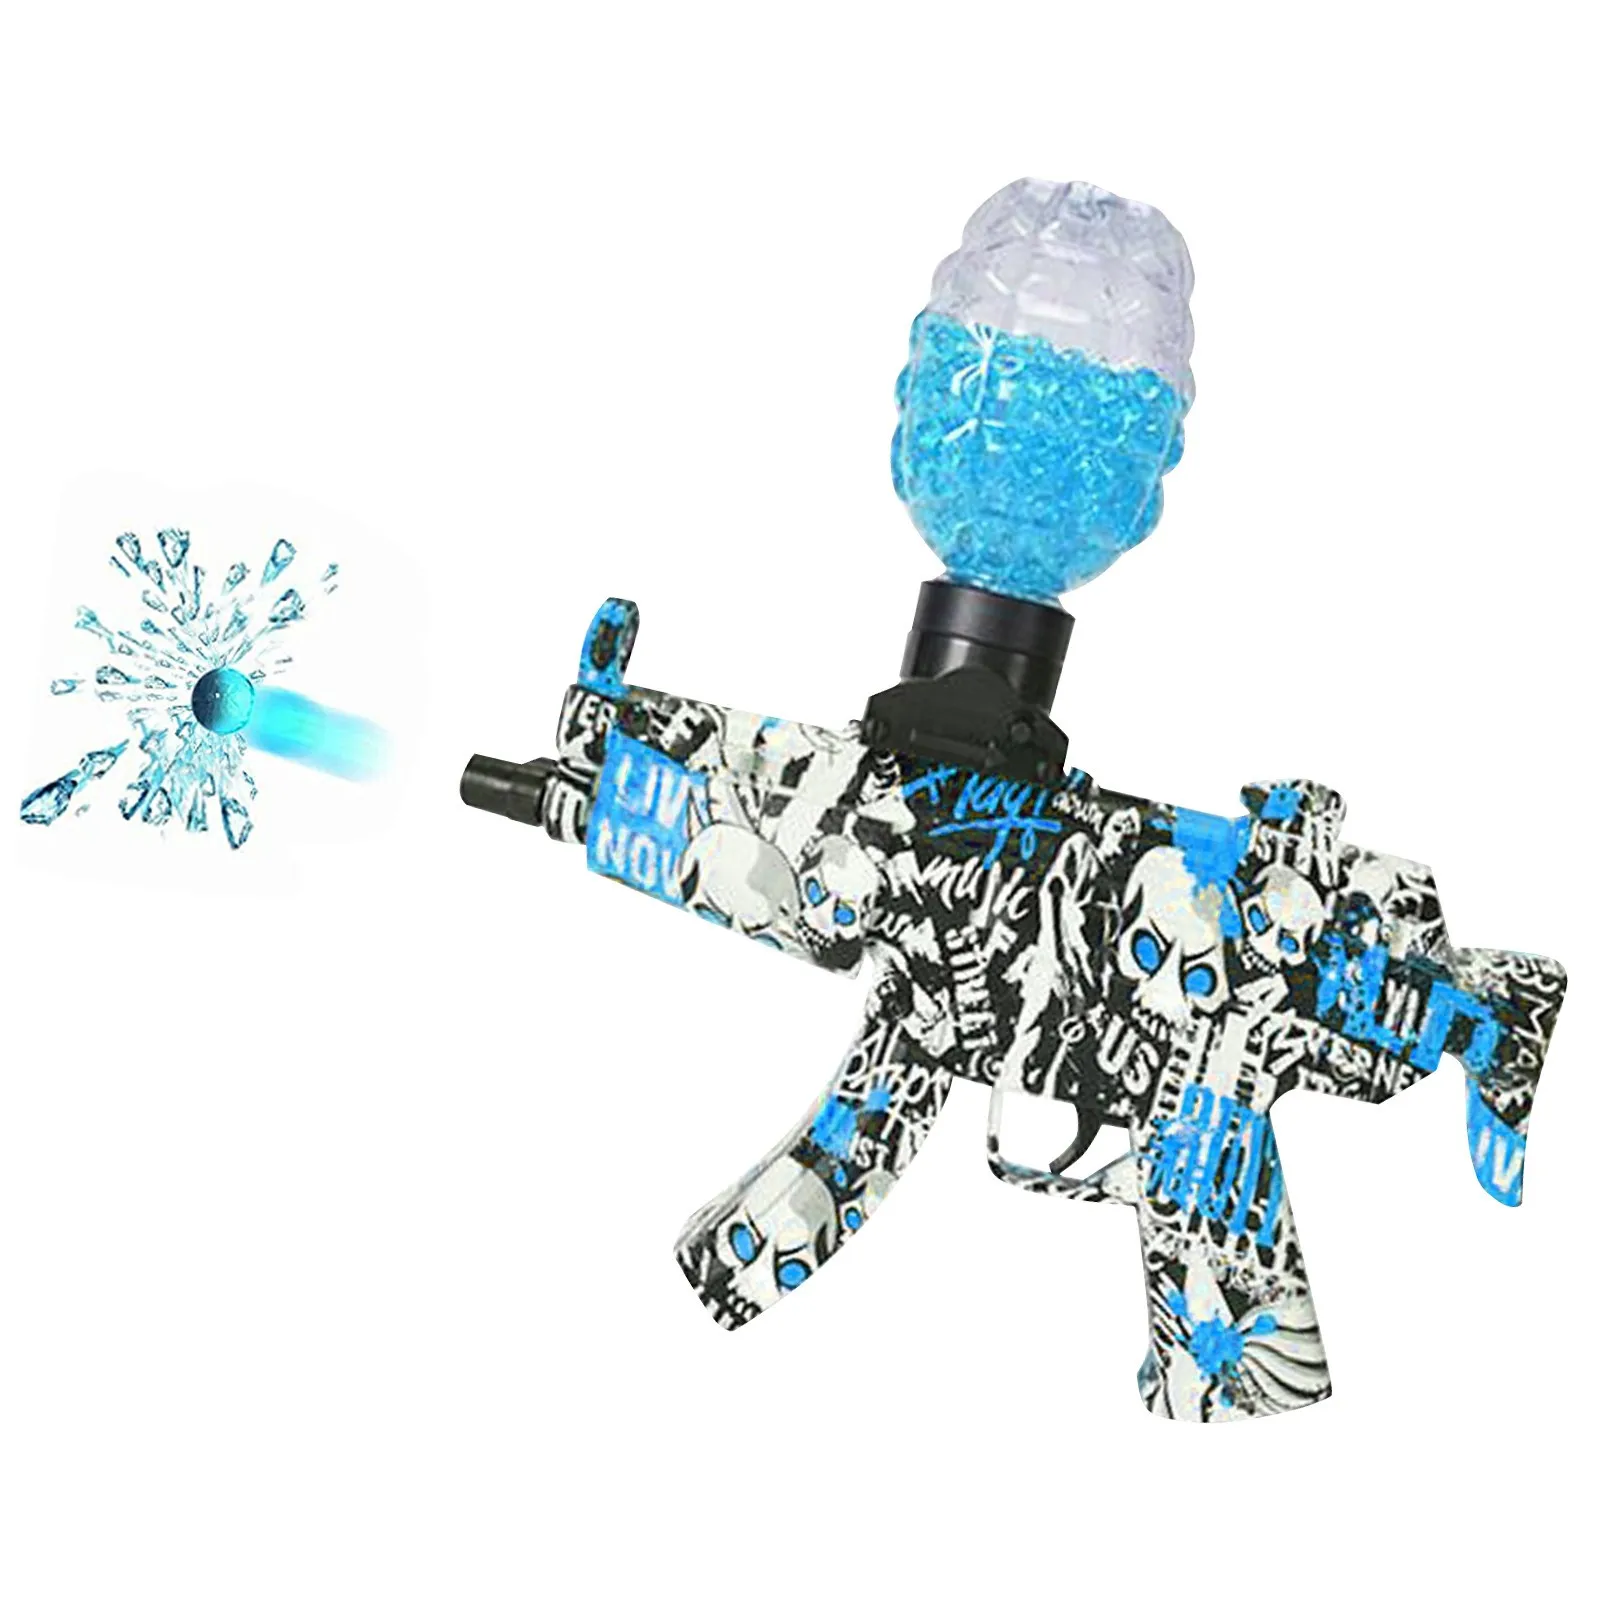 1set Gel Ball Blaster Electric Splatter Ball Blaster Fun And Outdoor Team Shooting Games Birthday Gifts With 1000 Hydrogel Balls